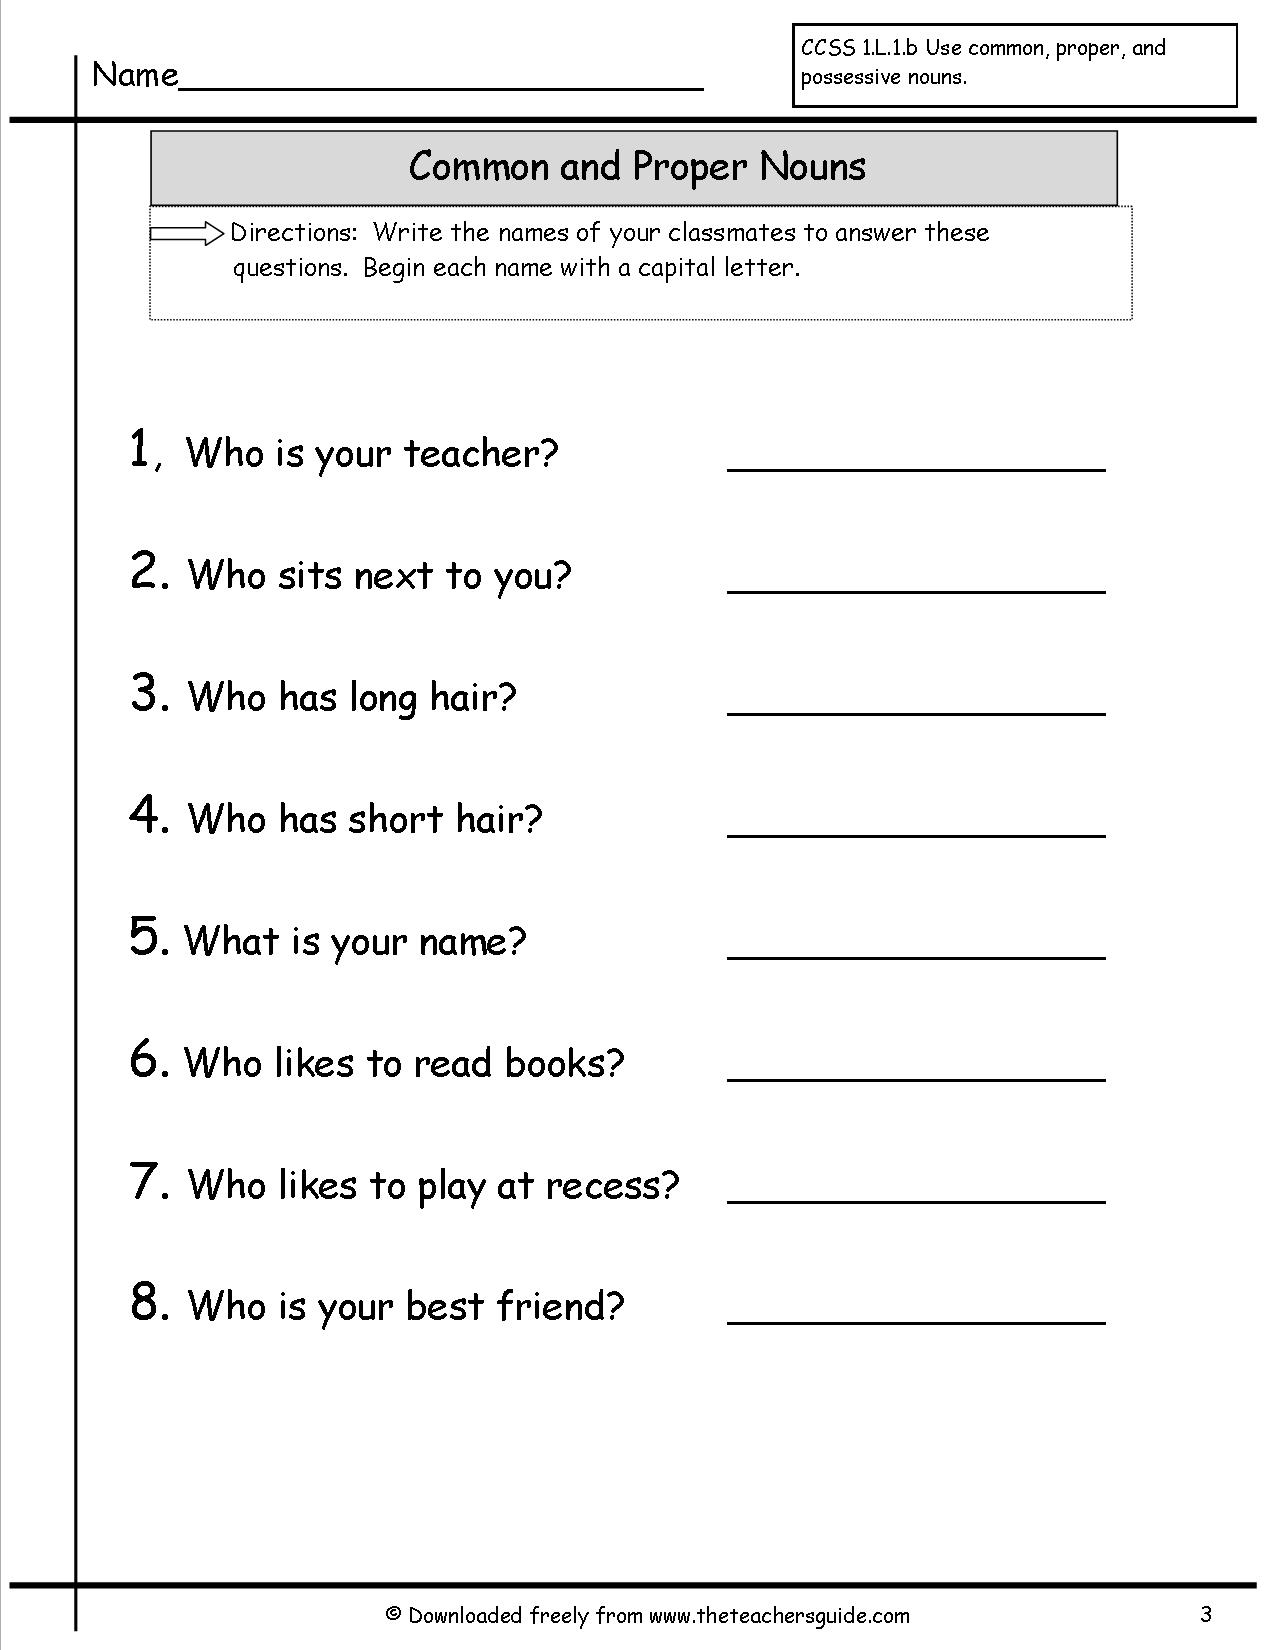 Common And Proper Nouns Worksheets For Grade 1 With Answers Free